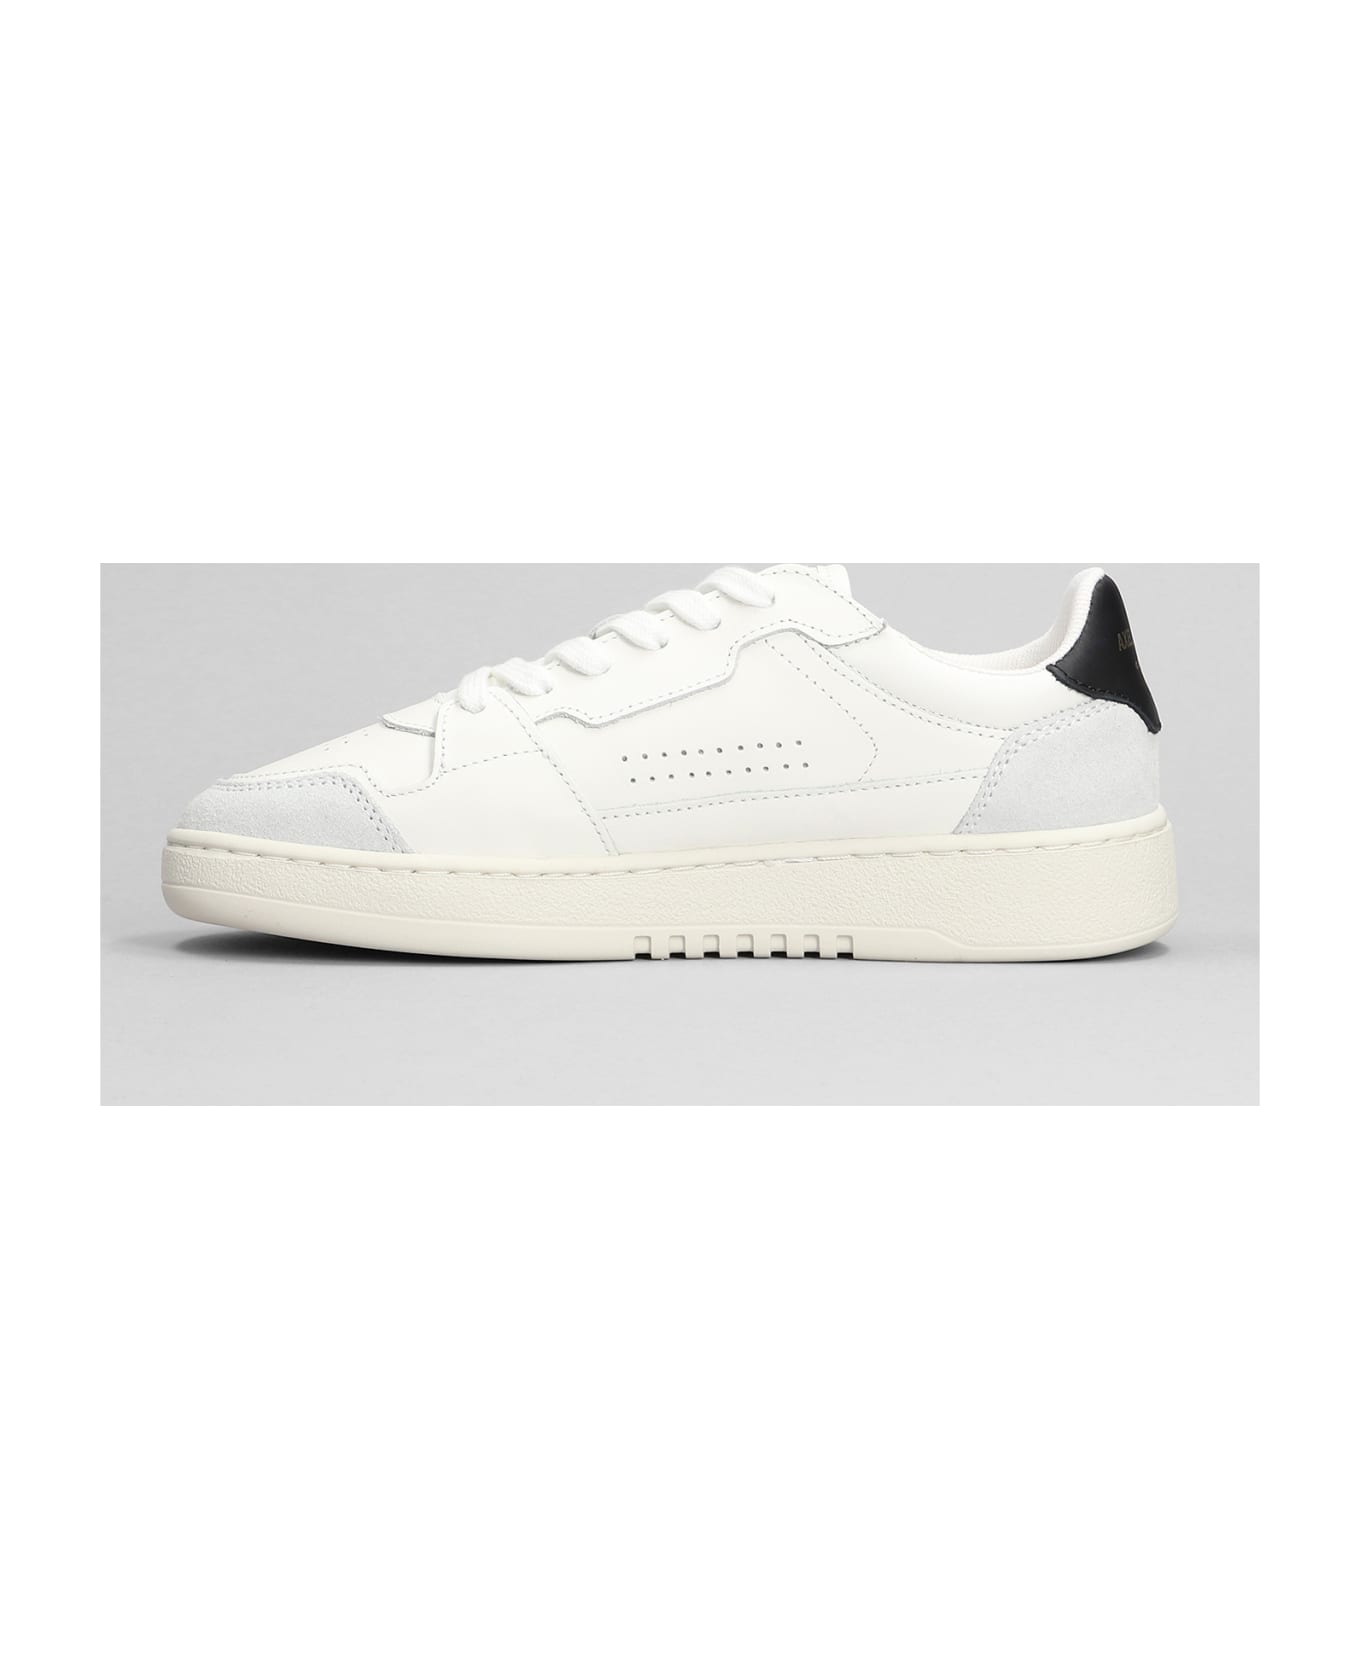 Axel Arigato Dice Lo Sneakers In White Suede And Leather - white スニーカー